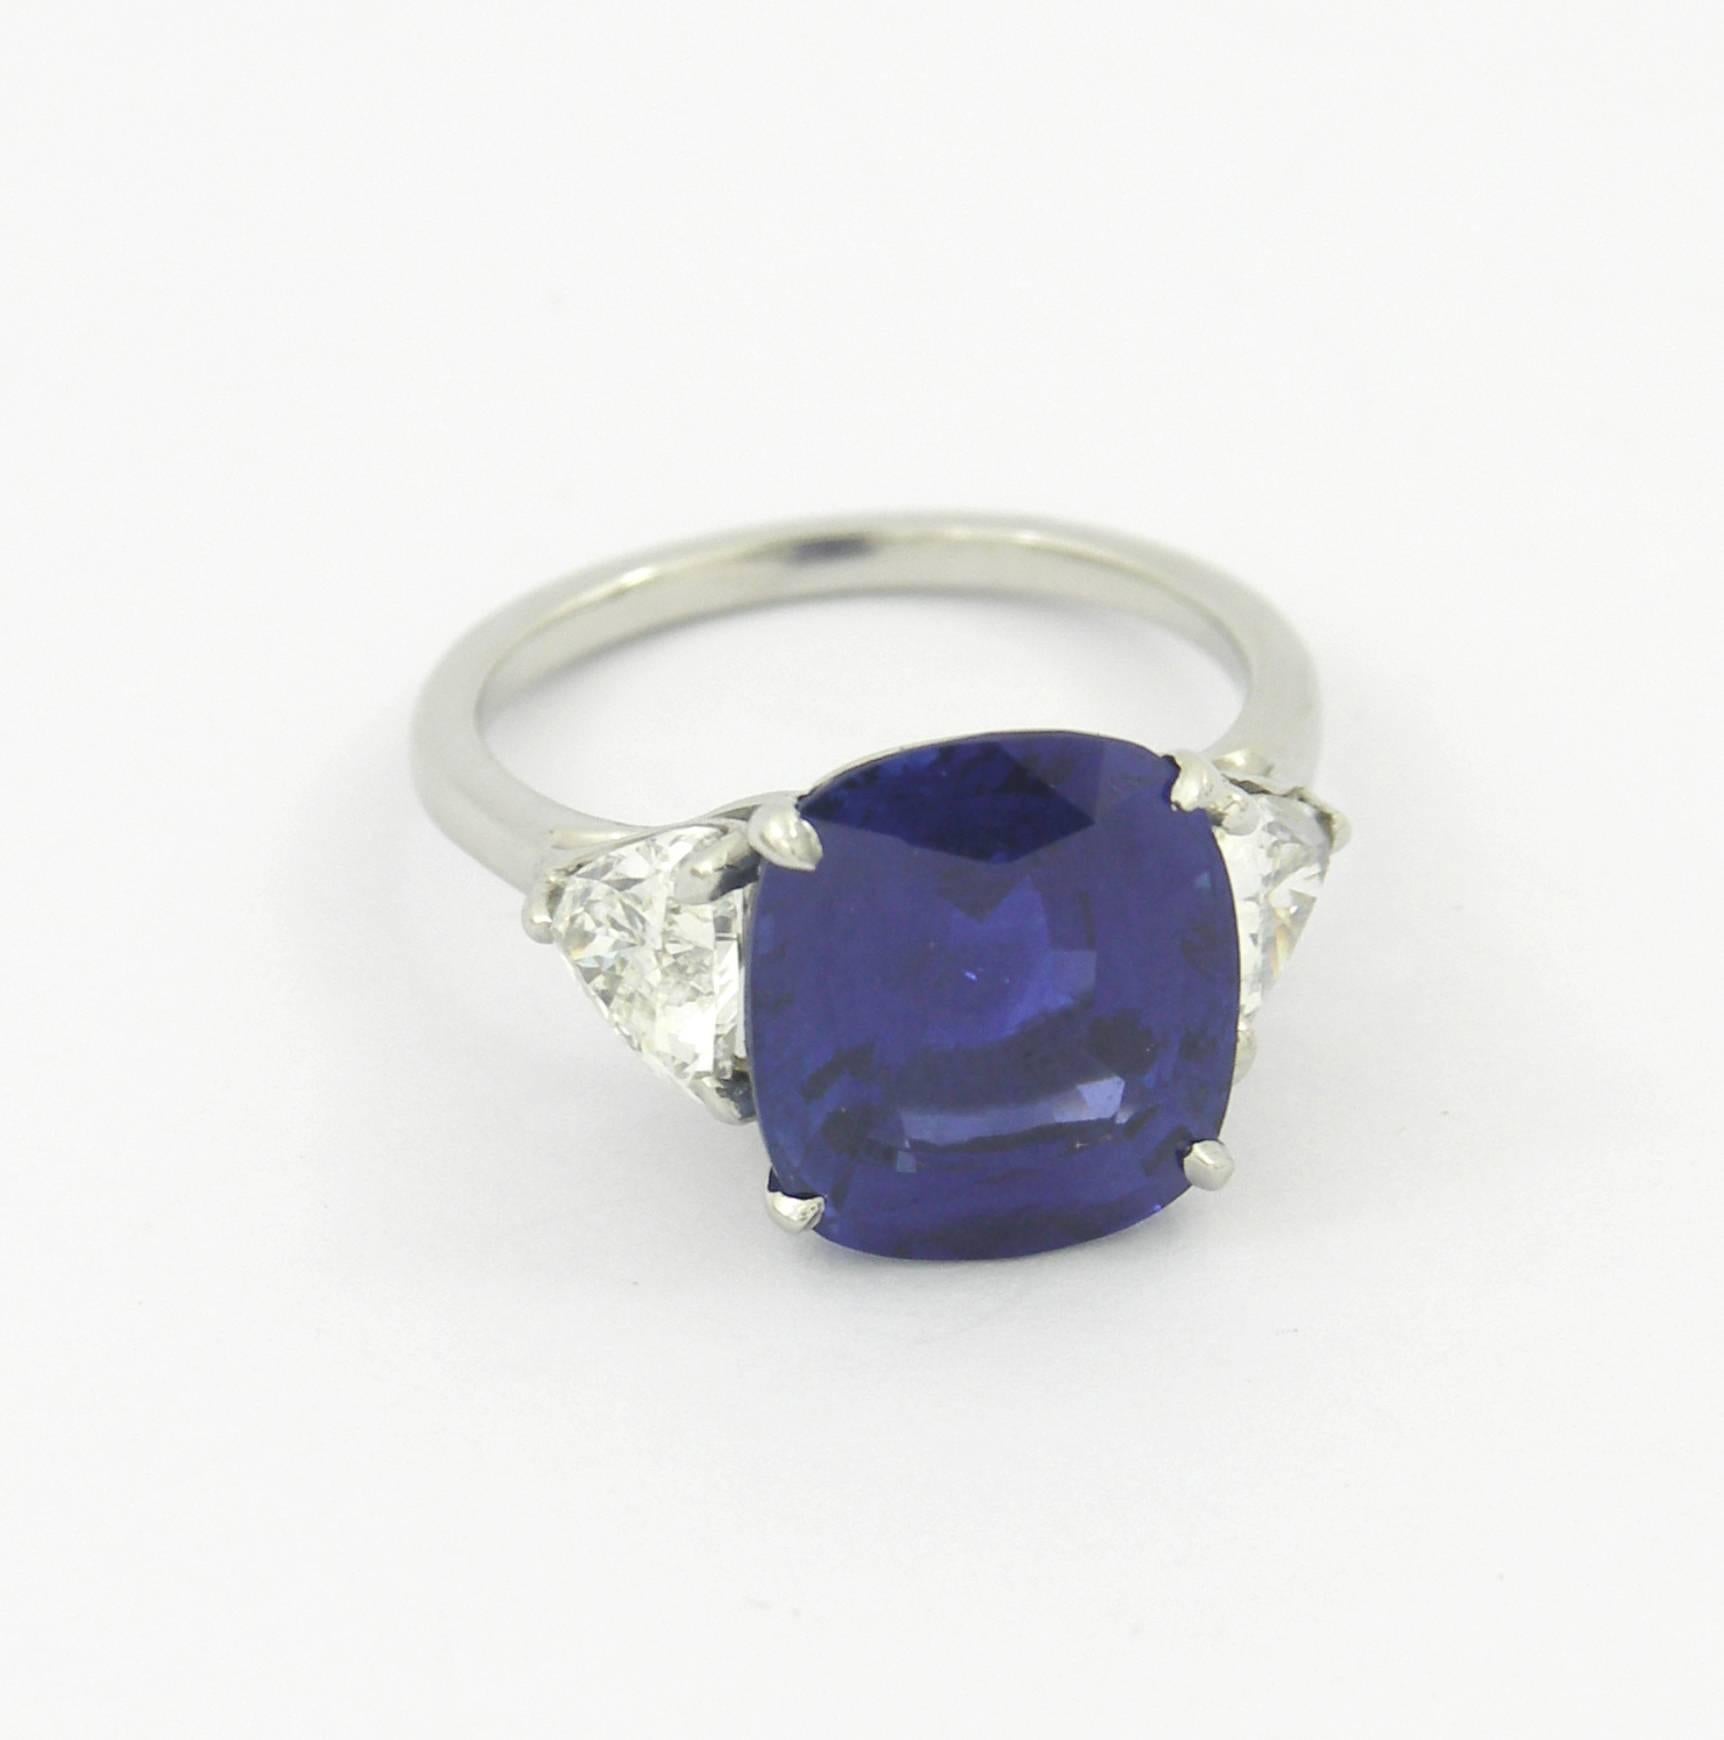 A hand made platinum ring centered around a 7.32ct cushion cut sapphire, with a trilliant cut diamond on either side, for a three stone inspired look. The Sapphire is described in an A.G.L. certificate as being of Ceylon origin, and is a vibrant